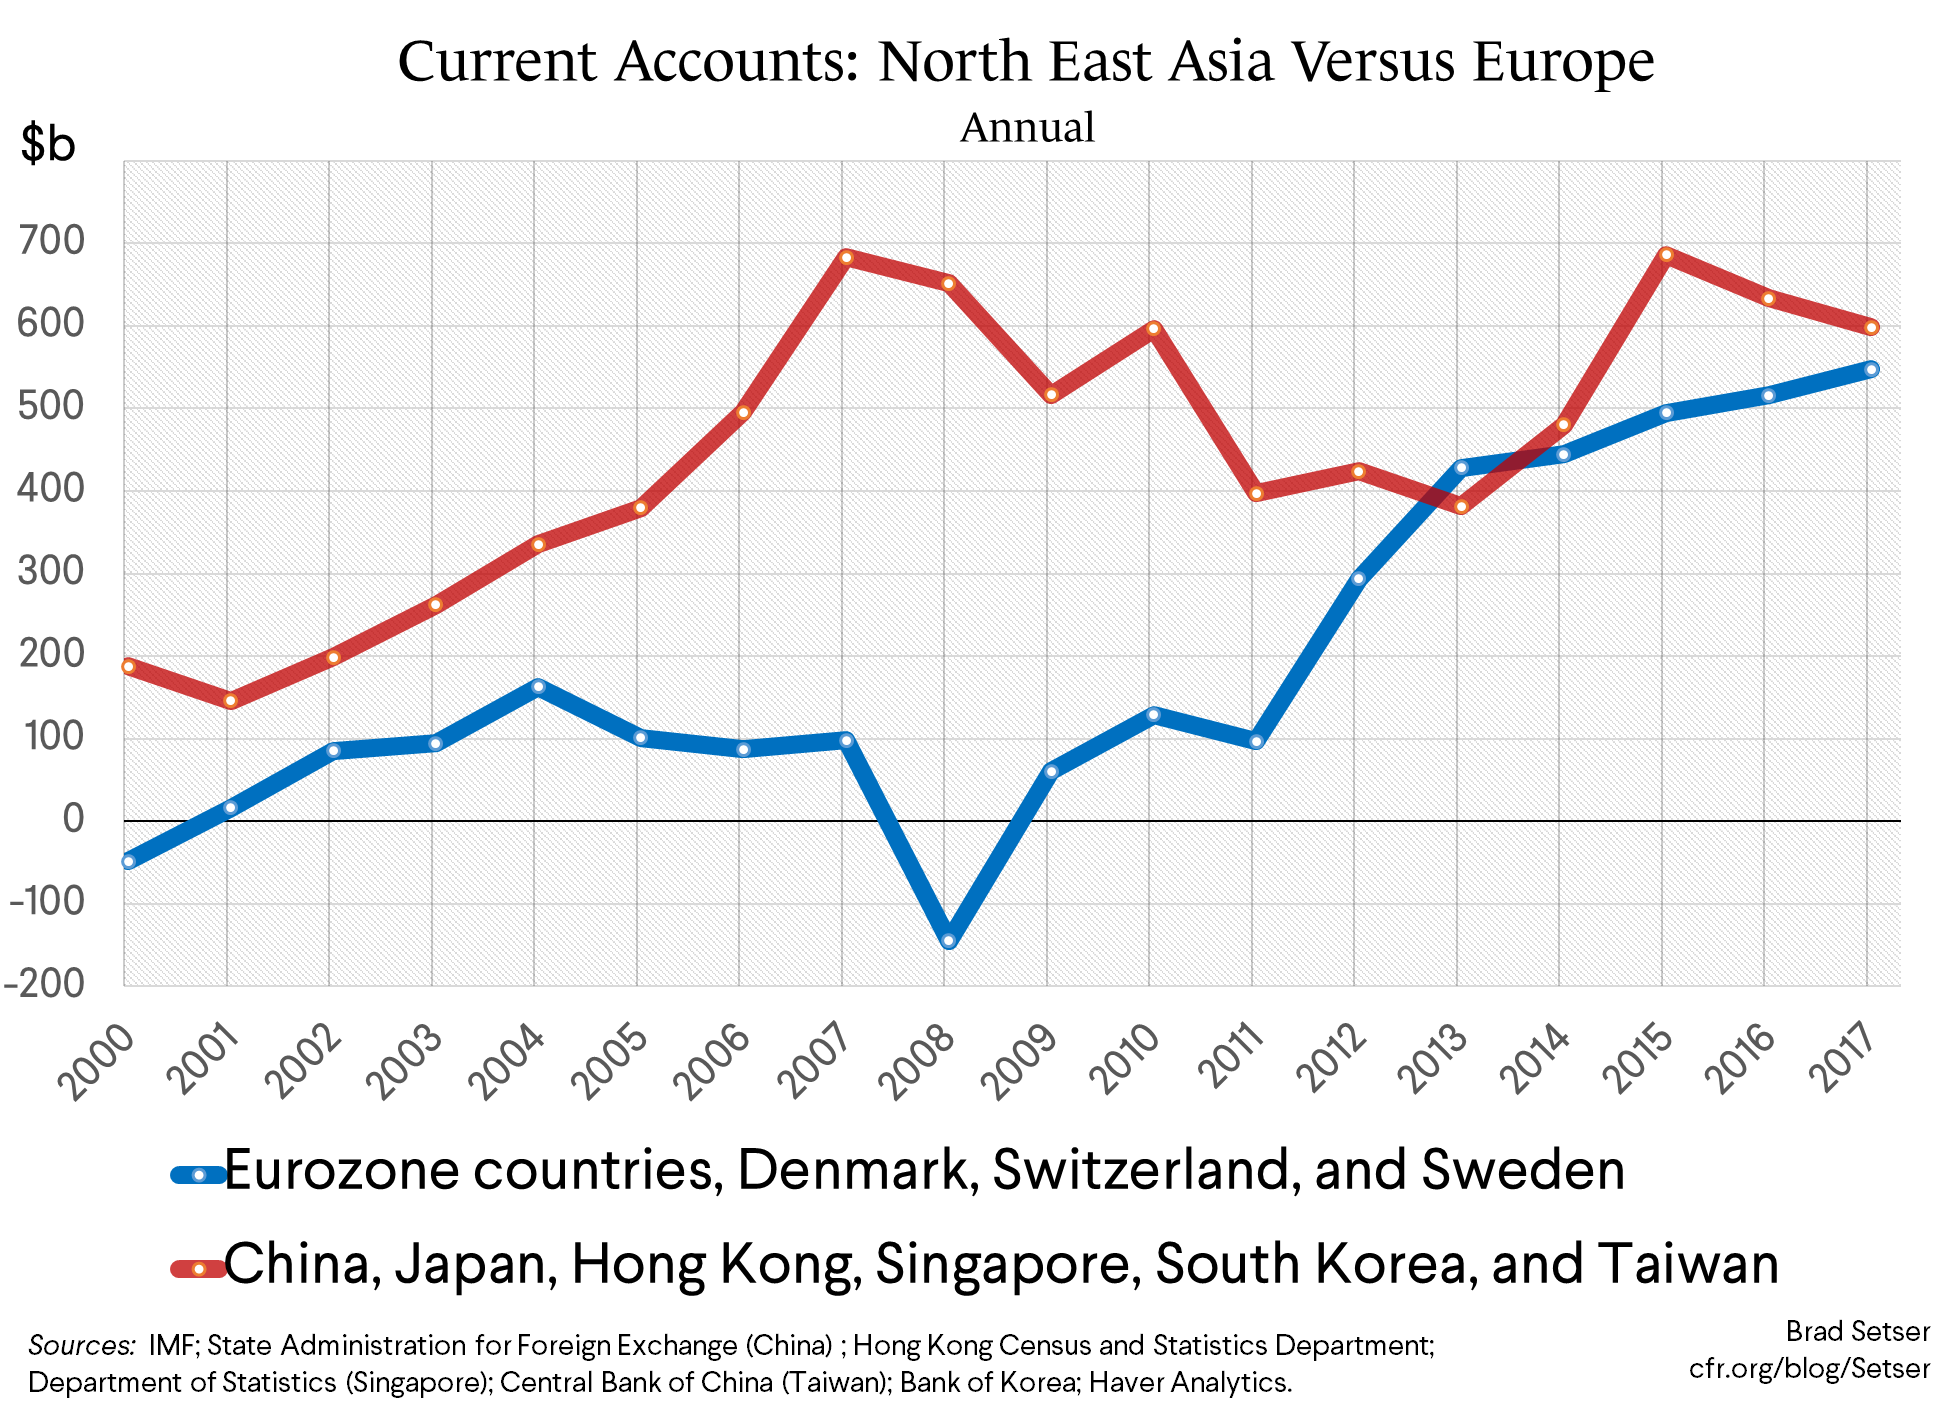 Asia's Central Banks and Sovereign Funds Are Back